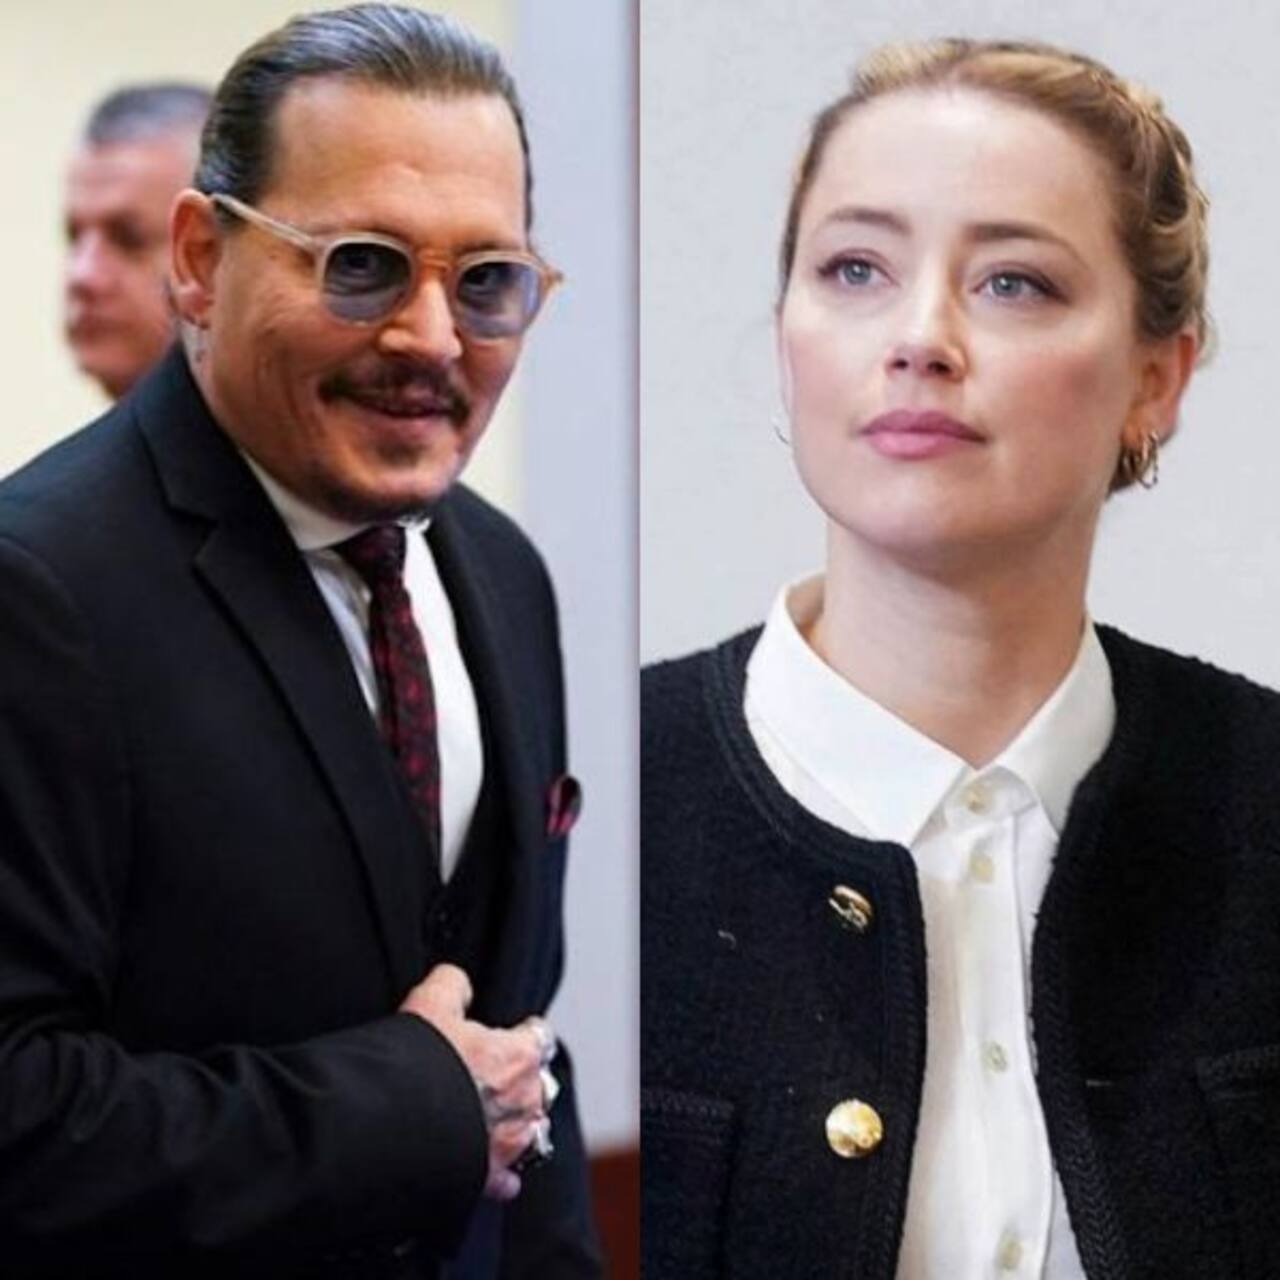 Johnny Depp-Amber Heard case: Camille Vasquez calls Amber's 'sobbing without tears' the ‘performance of her life’